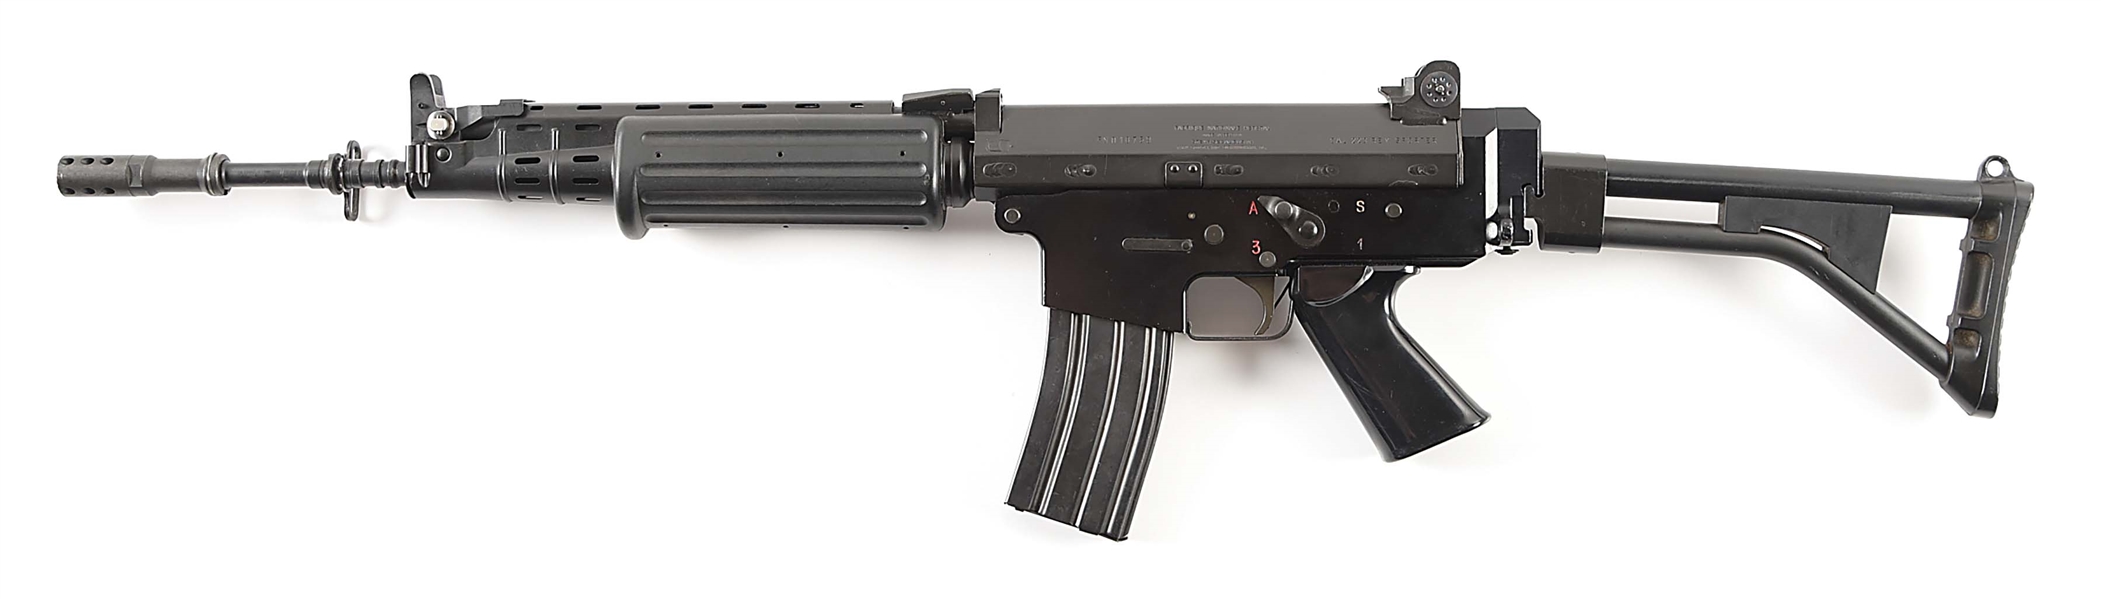 (N) FOLDING STOCK FABRIQUE NATIONALE FN-C HOST GUN WITH S&H ARMS AUTO SEAR MACHINE GUN (FULLY TRANSFERABLE). 